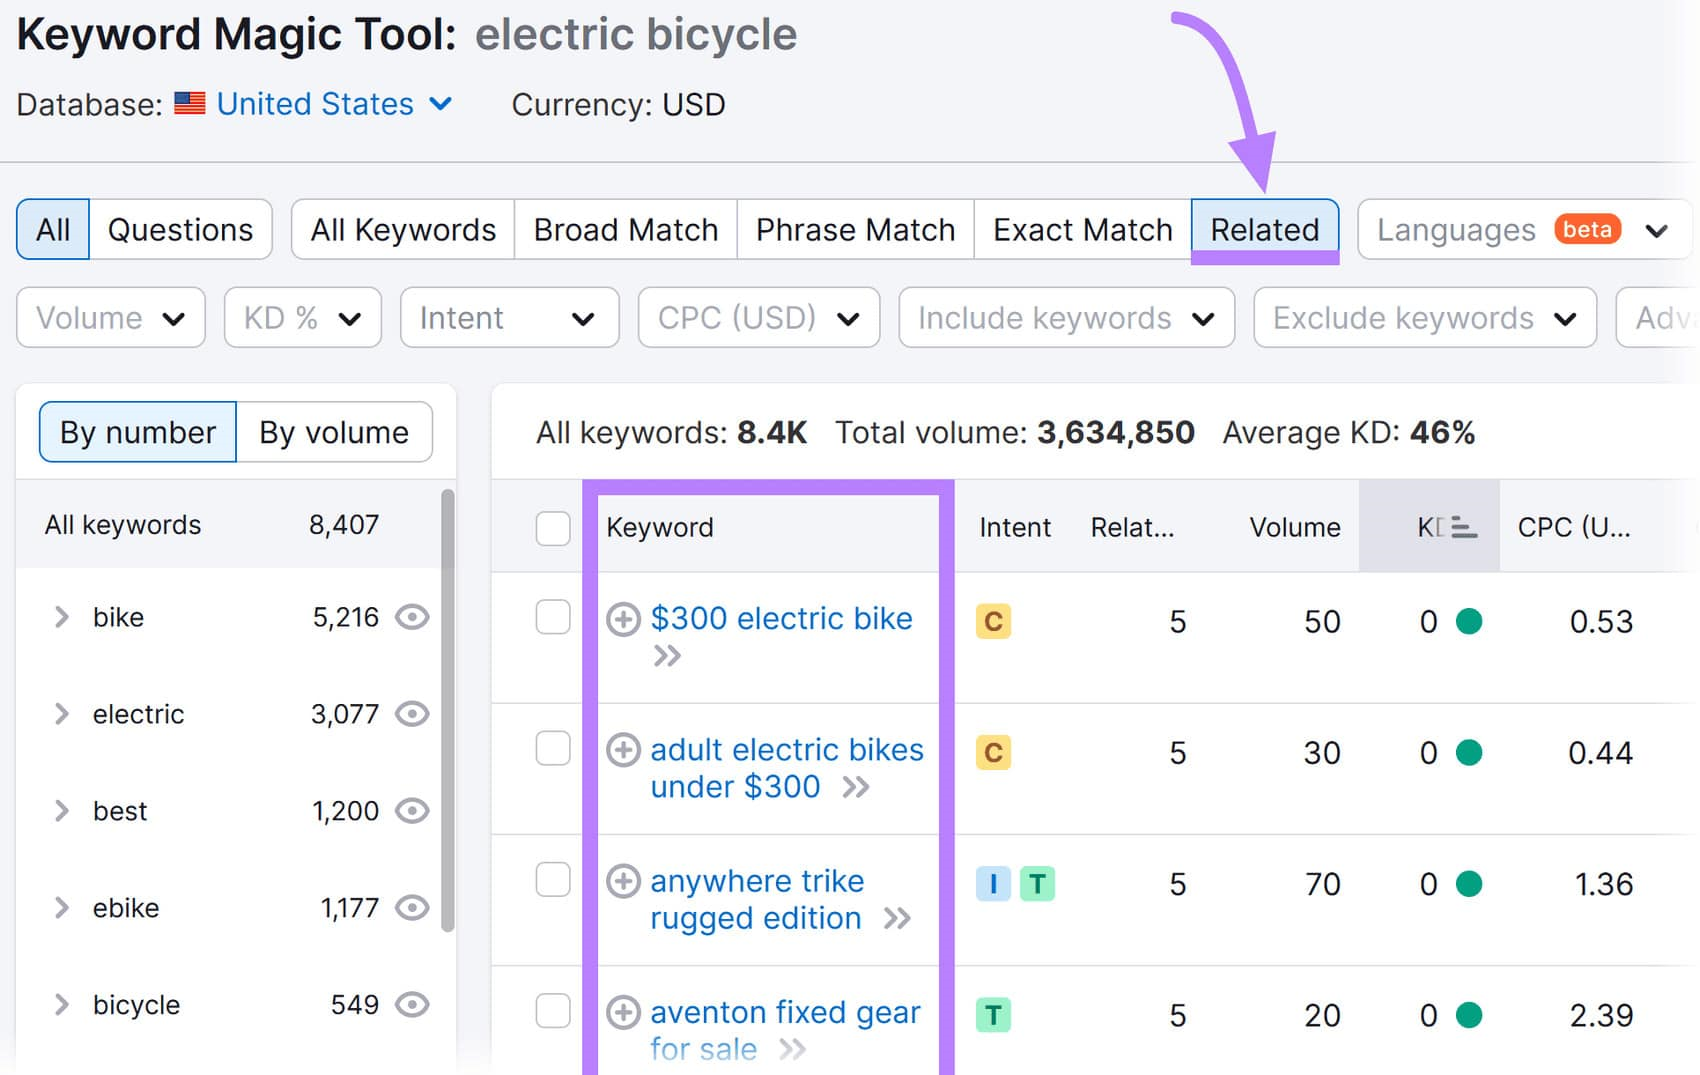 Keyword Magic Tool's "Related" results for "electric bicycle" search